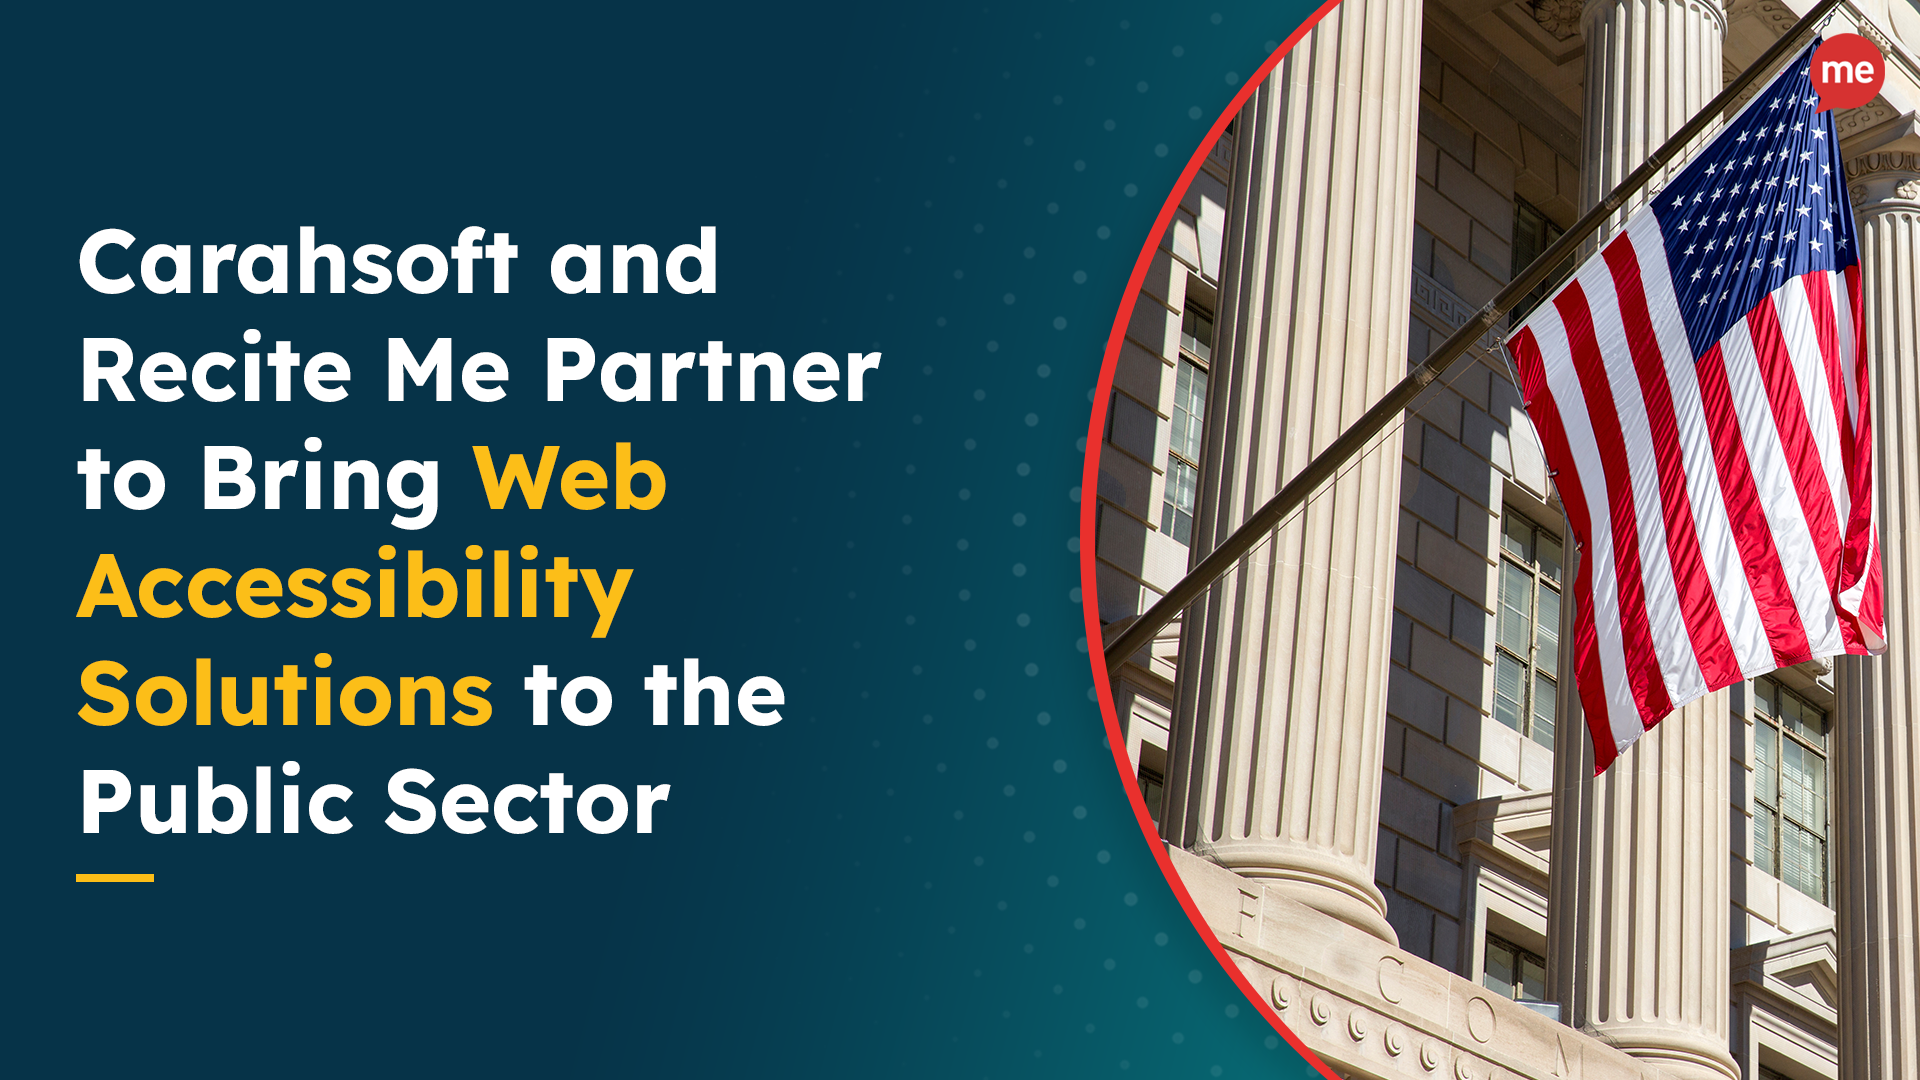 Carahsoft and Recite Me Partner to Bring Web Accessibility Solutions to the Public Sector